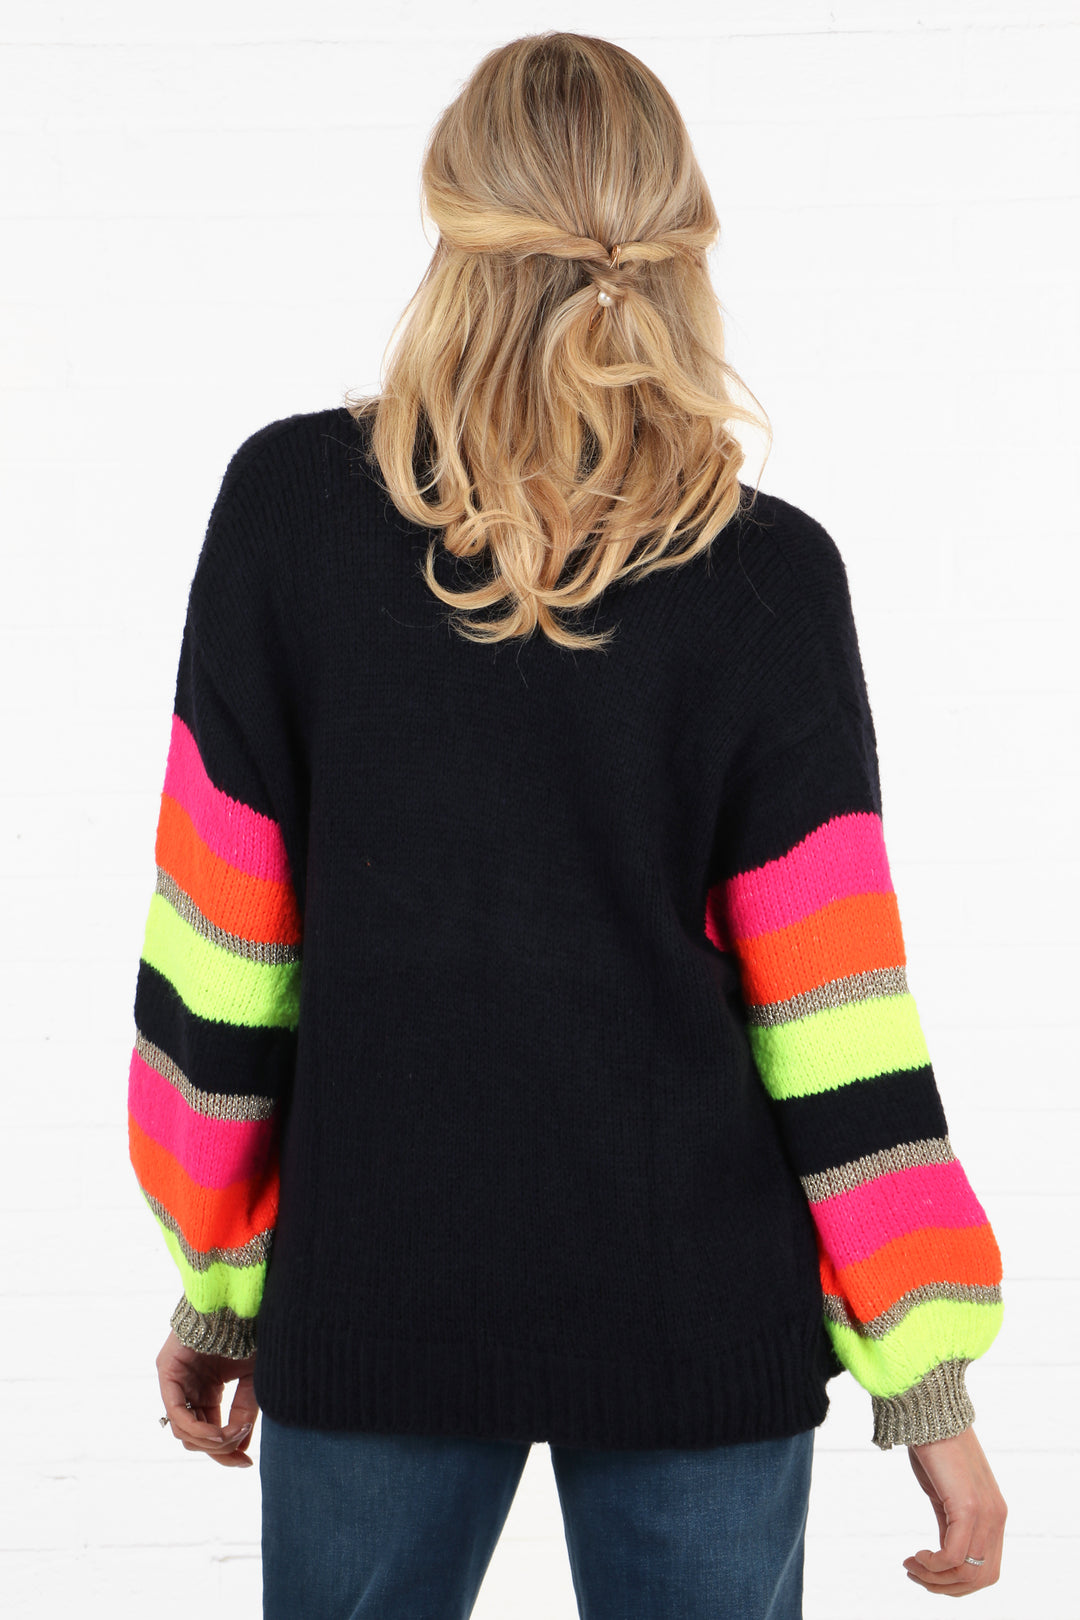 model showing the back of the cardigan, showing that the back is solid navy blue while the sleeves are colourfully stripes in pink, orange, neon yellow and gold